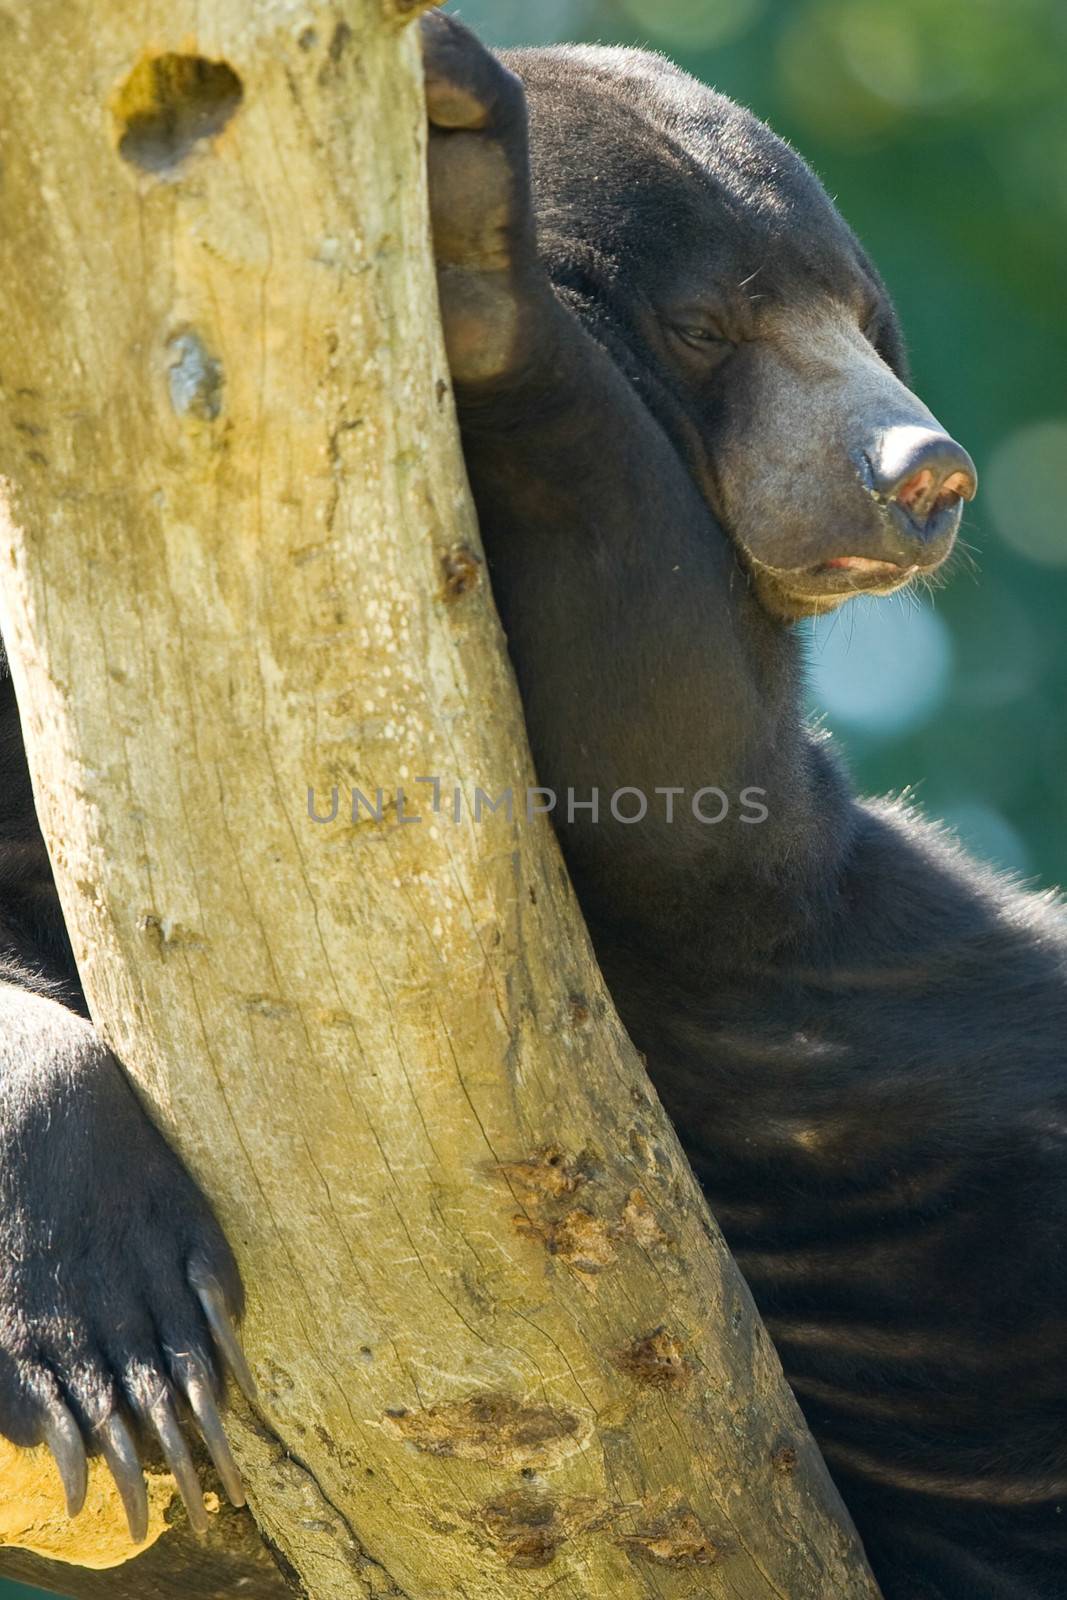 Portrait of sun bear leaning against tree trunk, Malaysia.